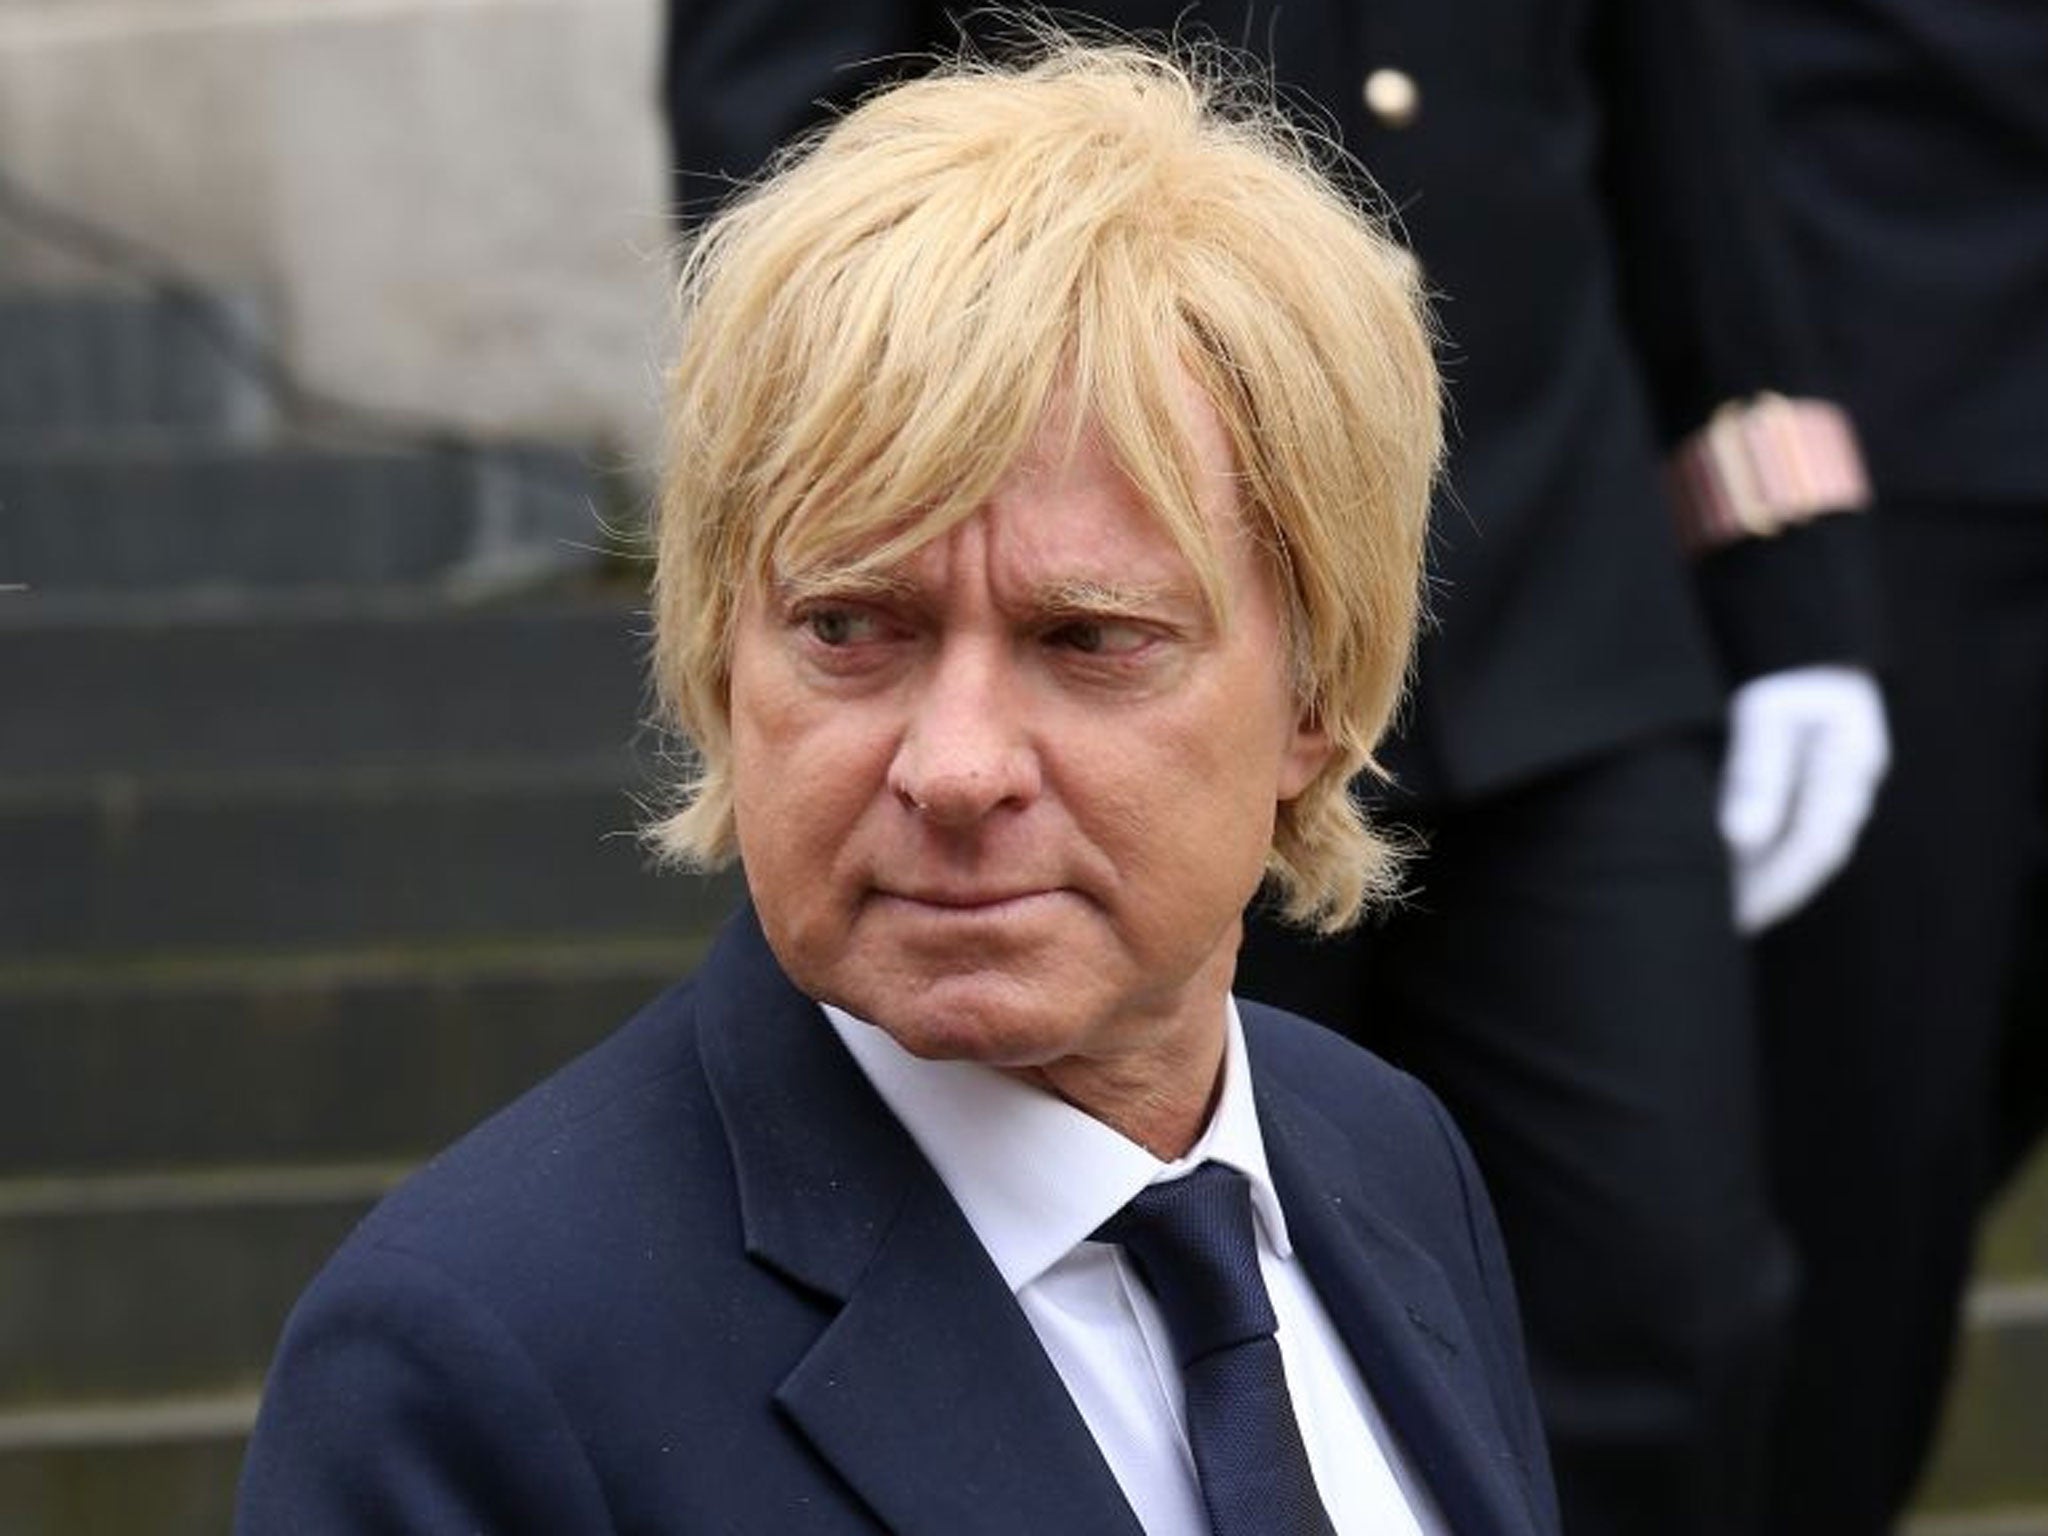 Fabricant tweeted that